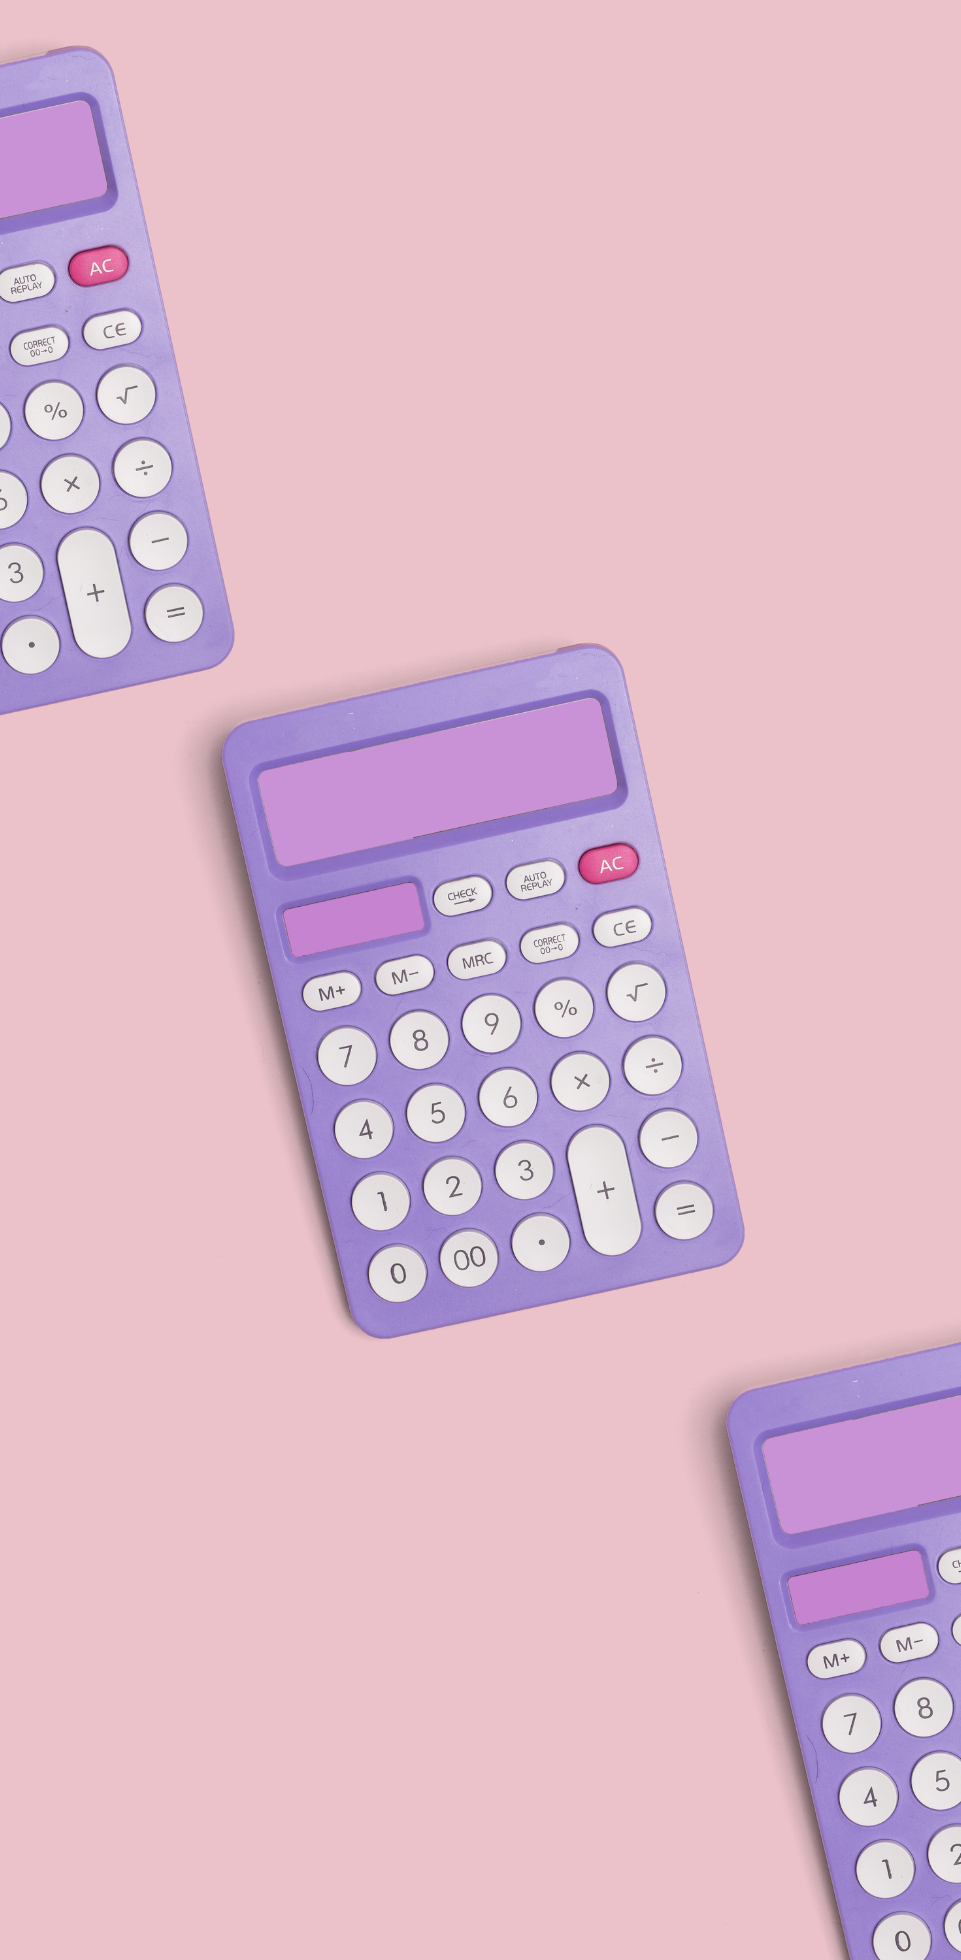 Image of a calculator used to illustrate how important accurate pricing is in the baking and sweets industry is when selling hot cocoa bombs.